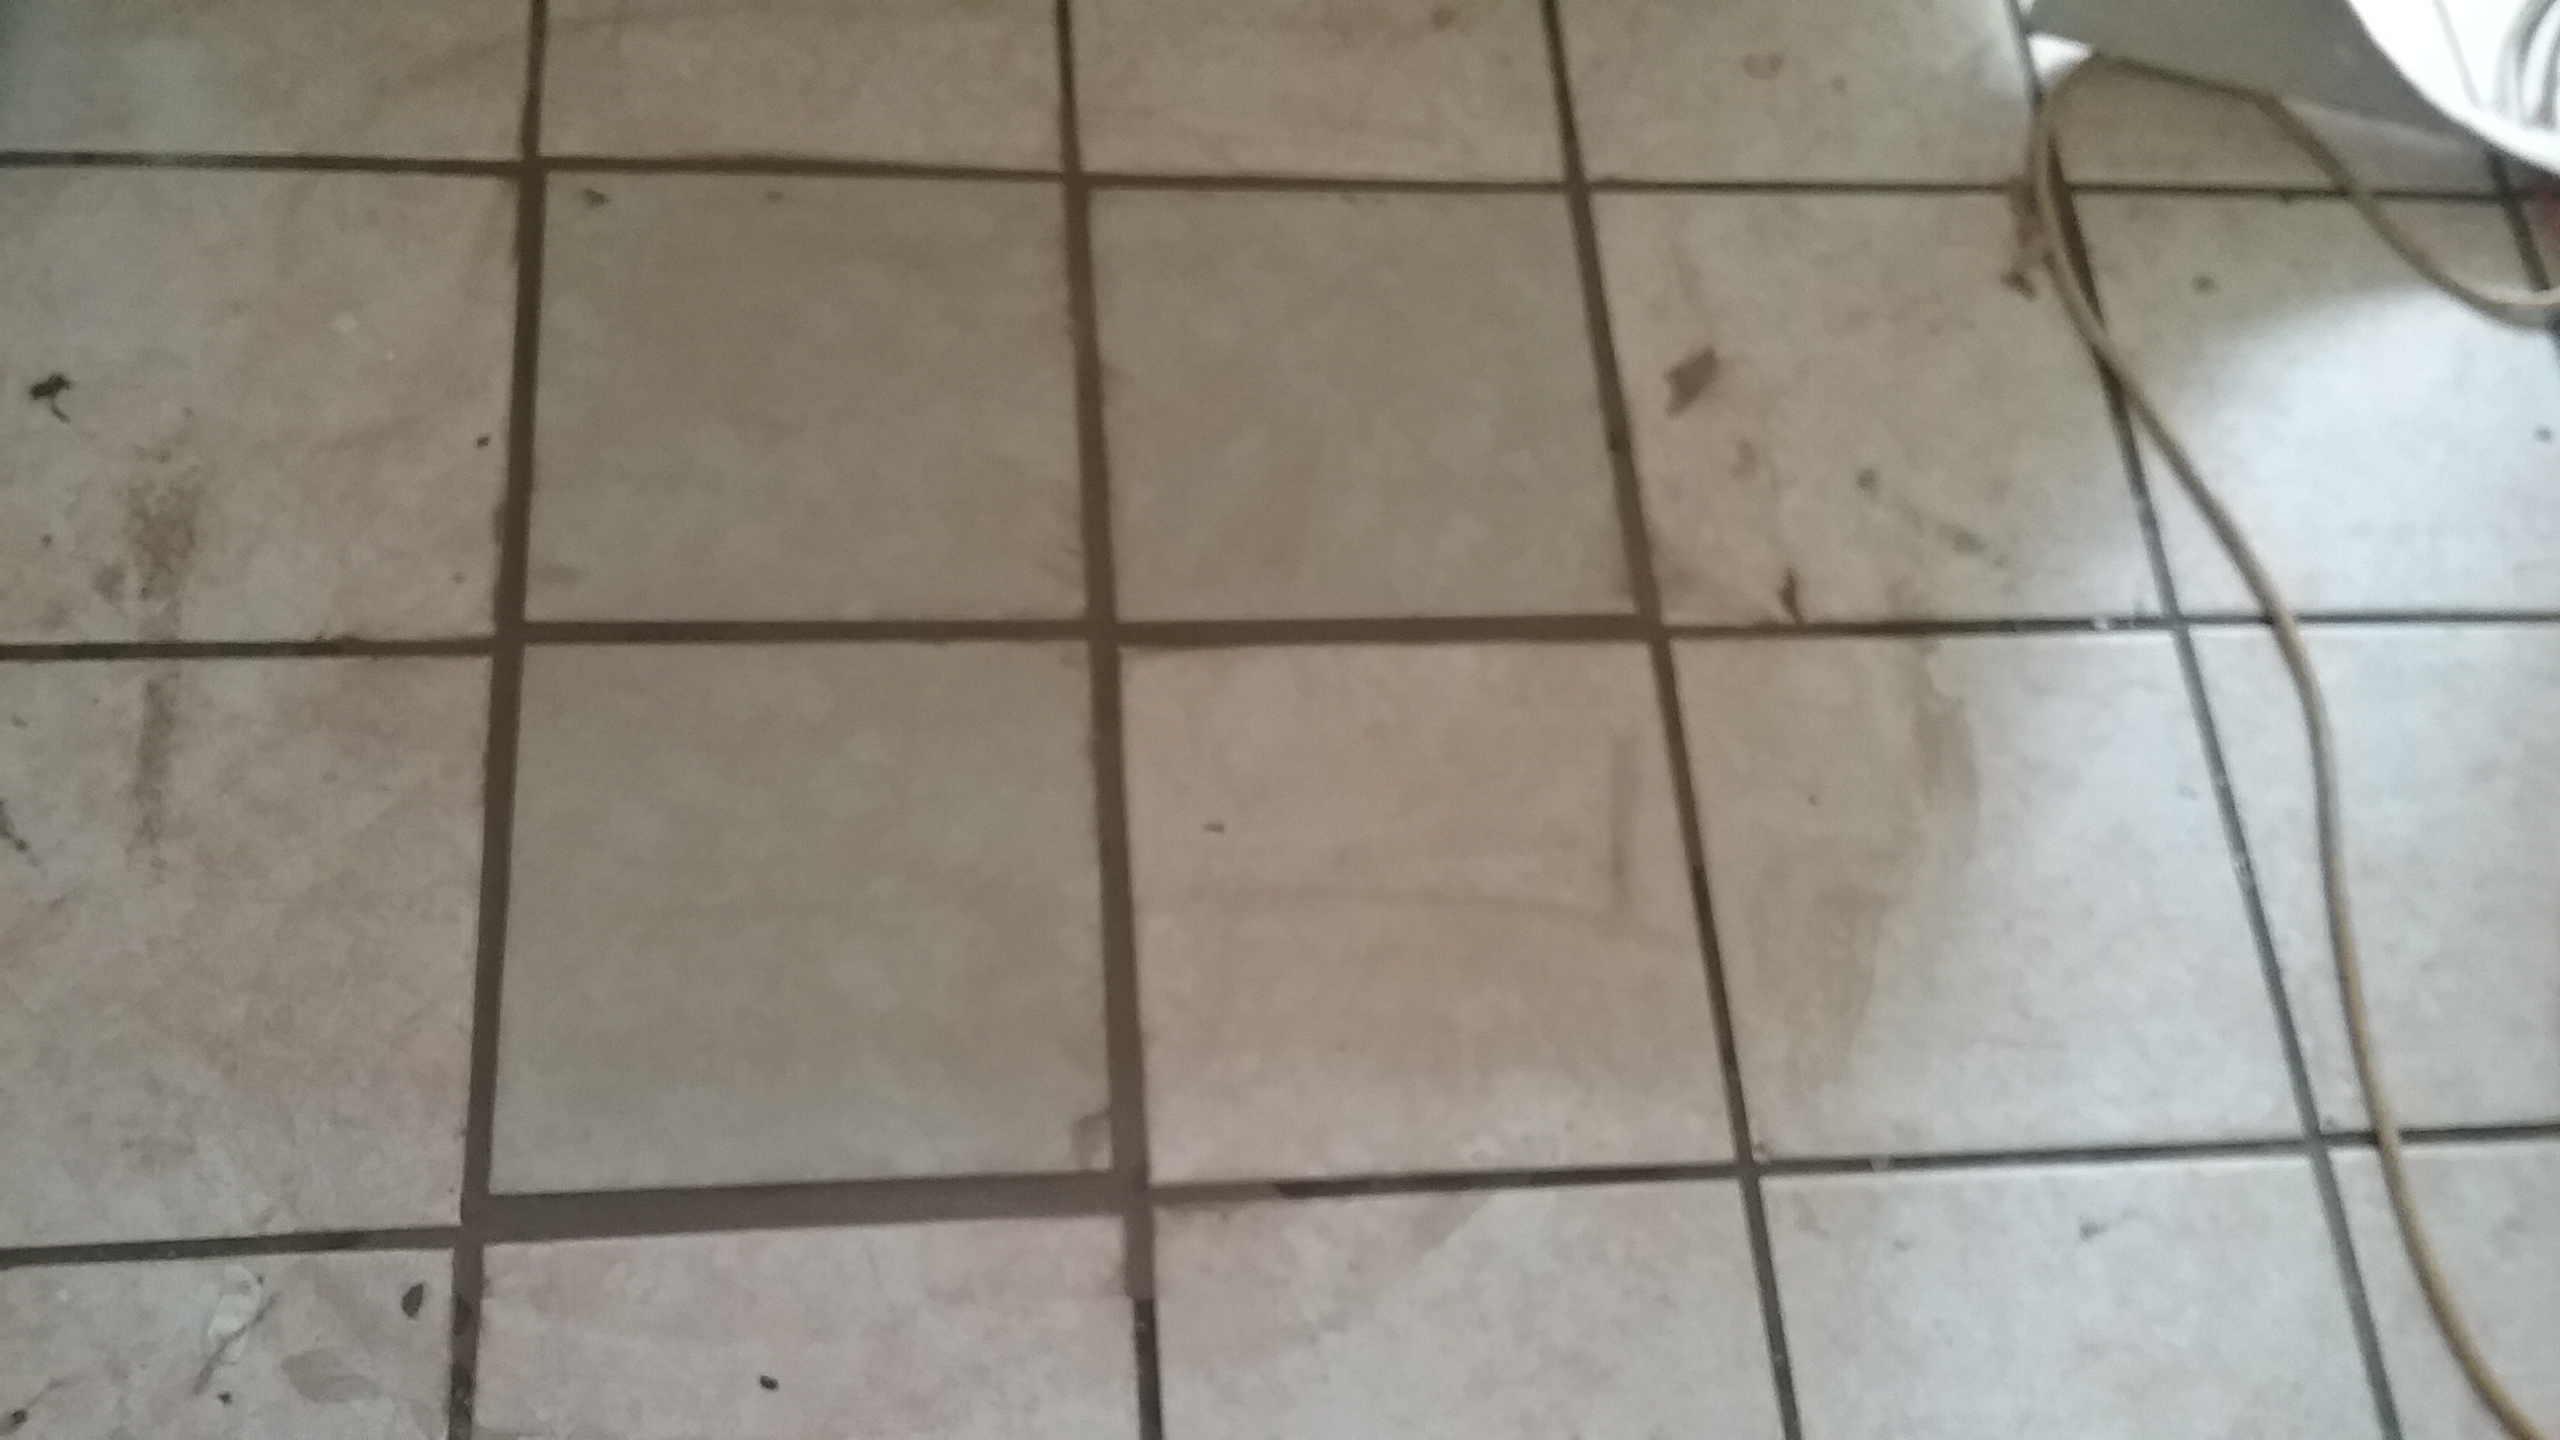 He replace my broken tiles with tiles that didn't match nor are the center to align with other tiles 